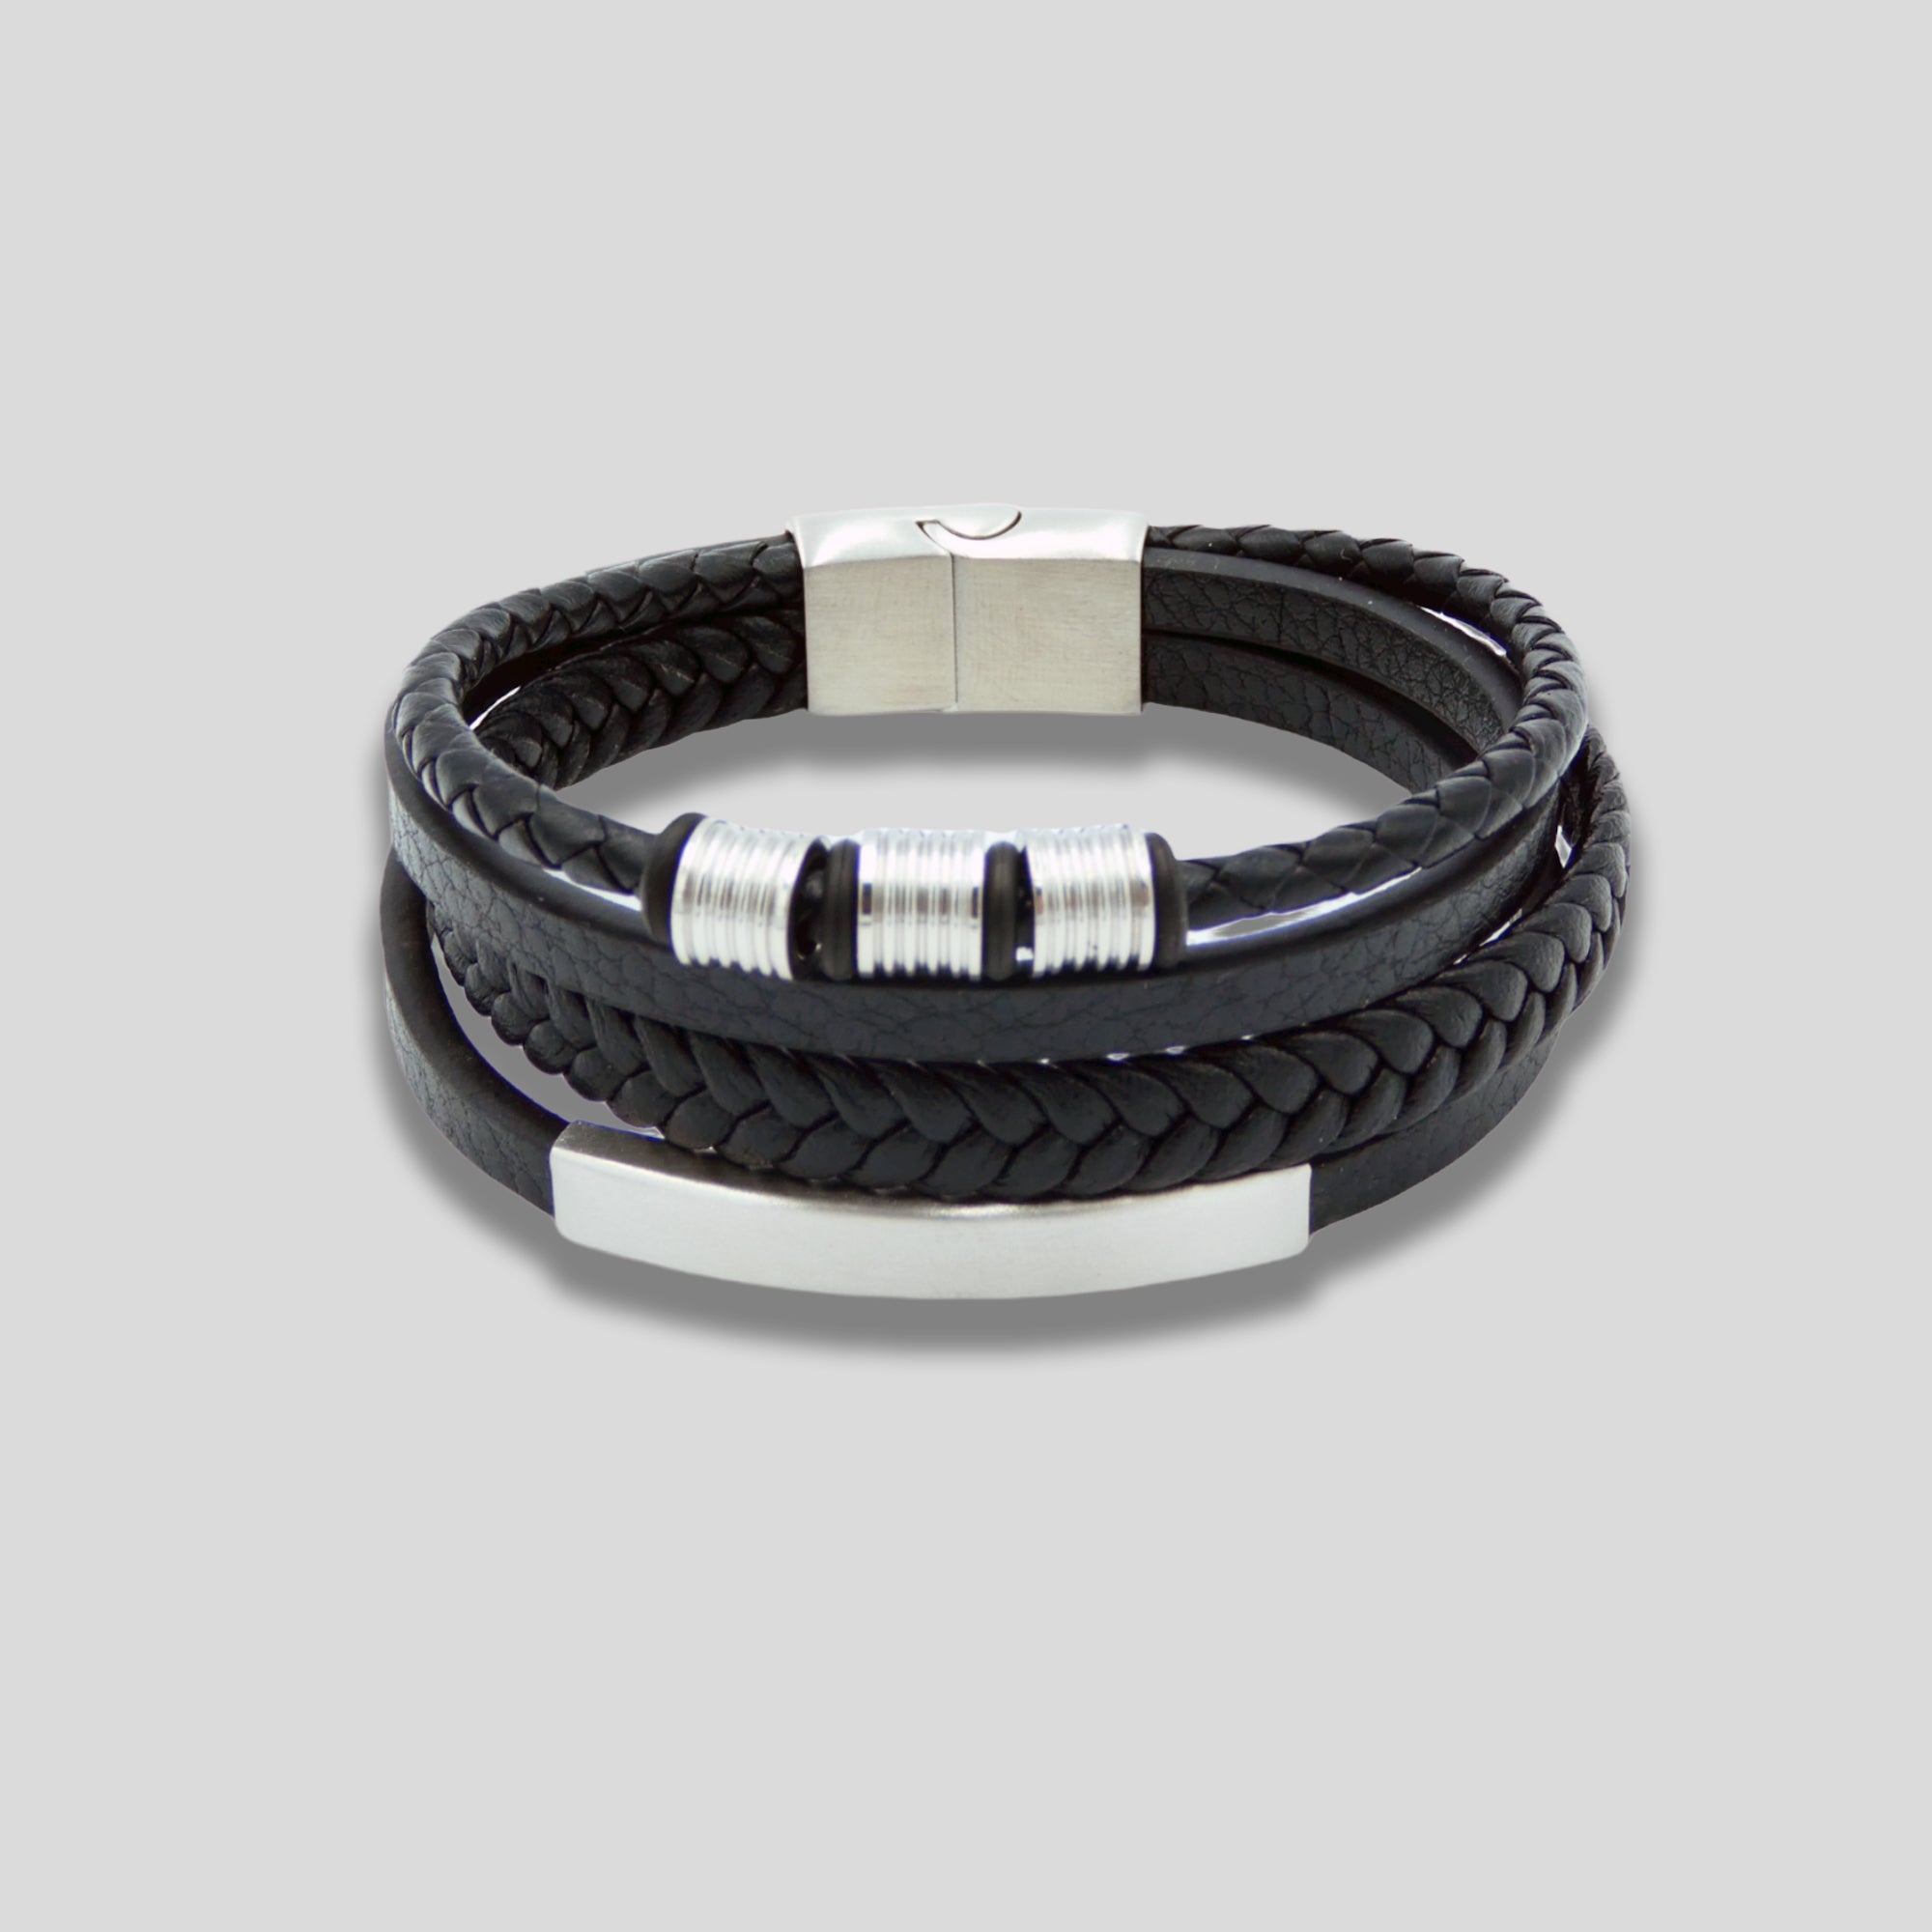 Black Multi Layer Leather Bracelet with Silver Charms